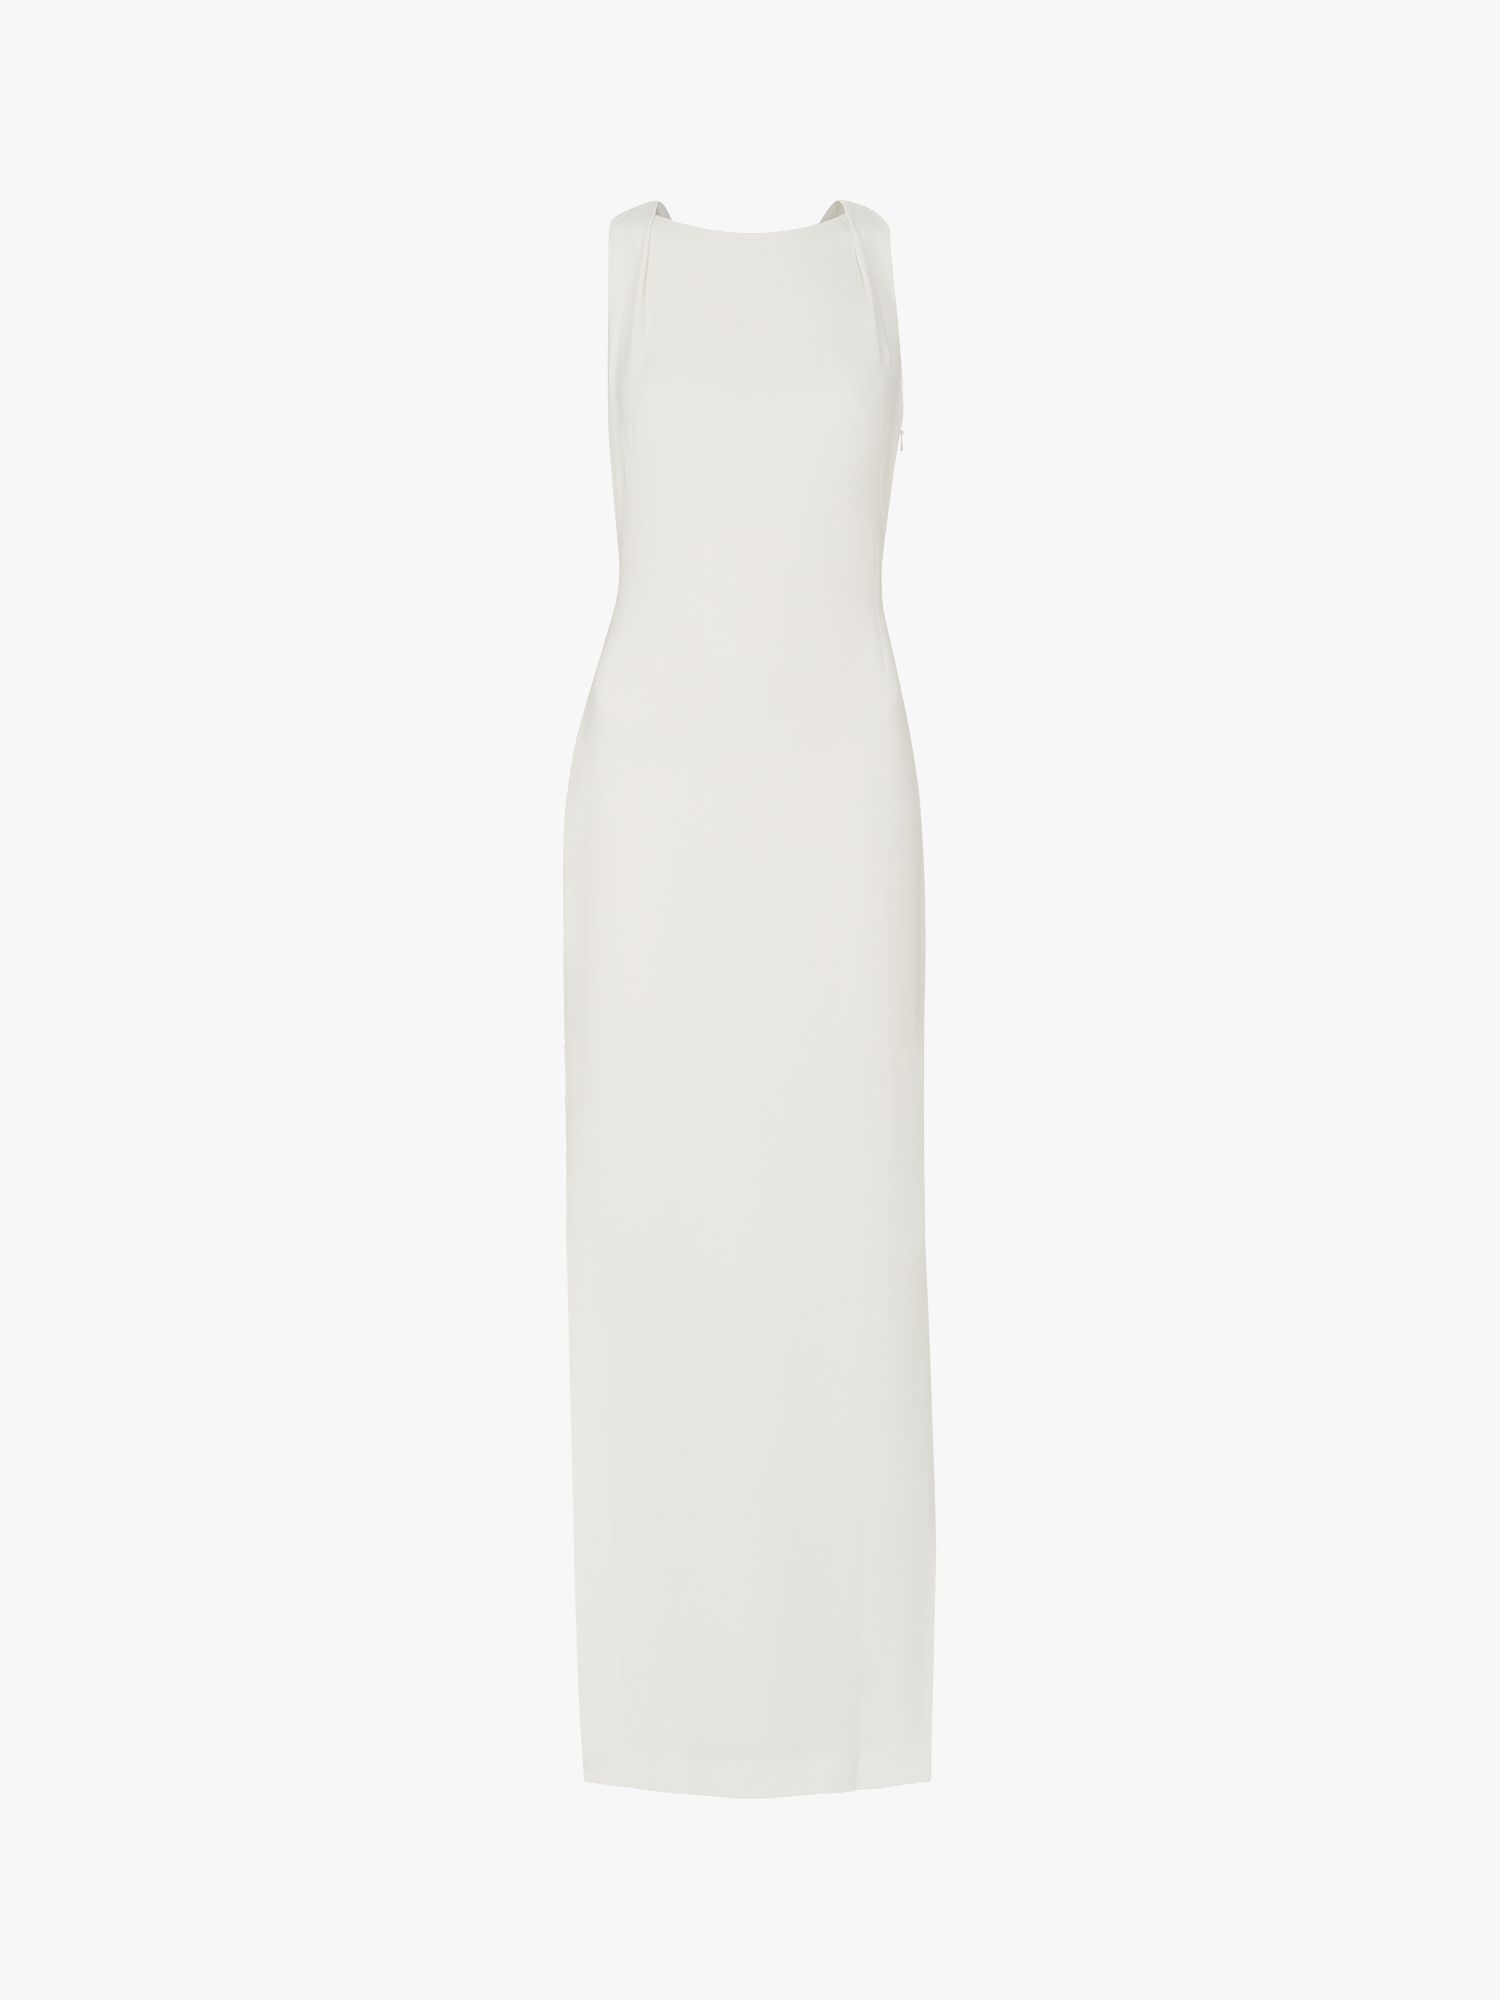 Whistles Tie Back Maxi Dress, Ivory at John Lewis & Partners